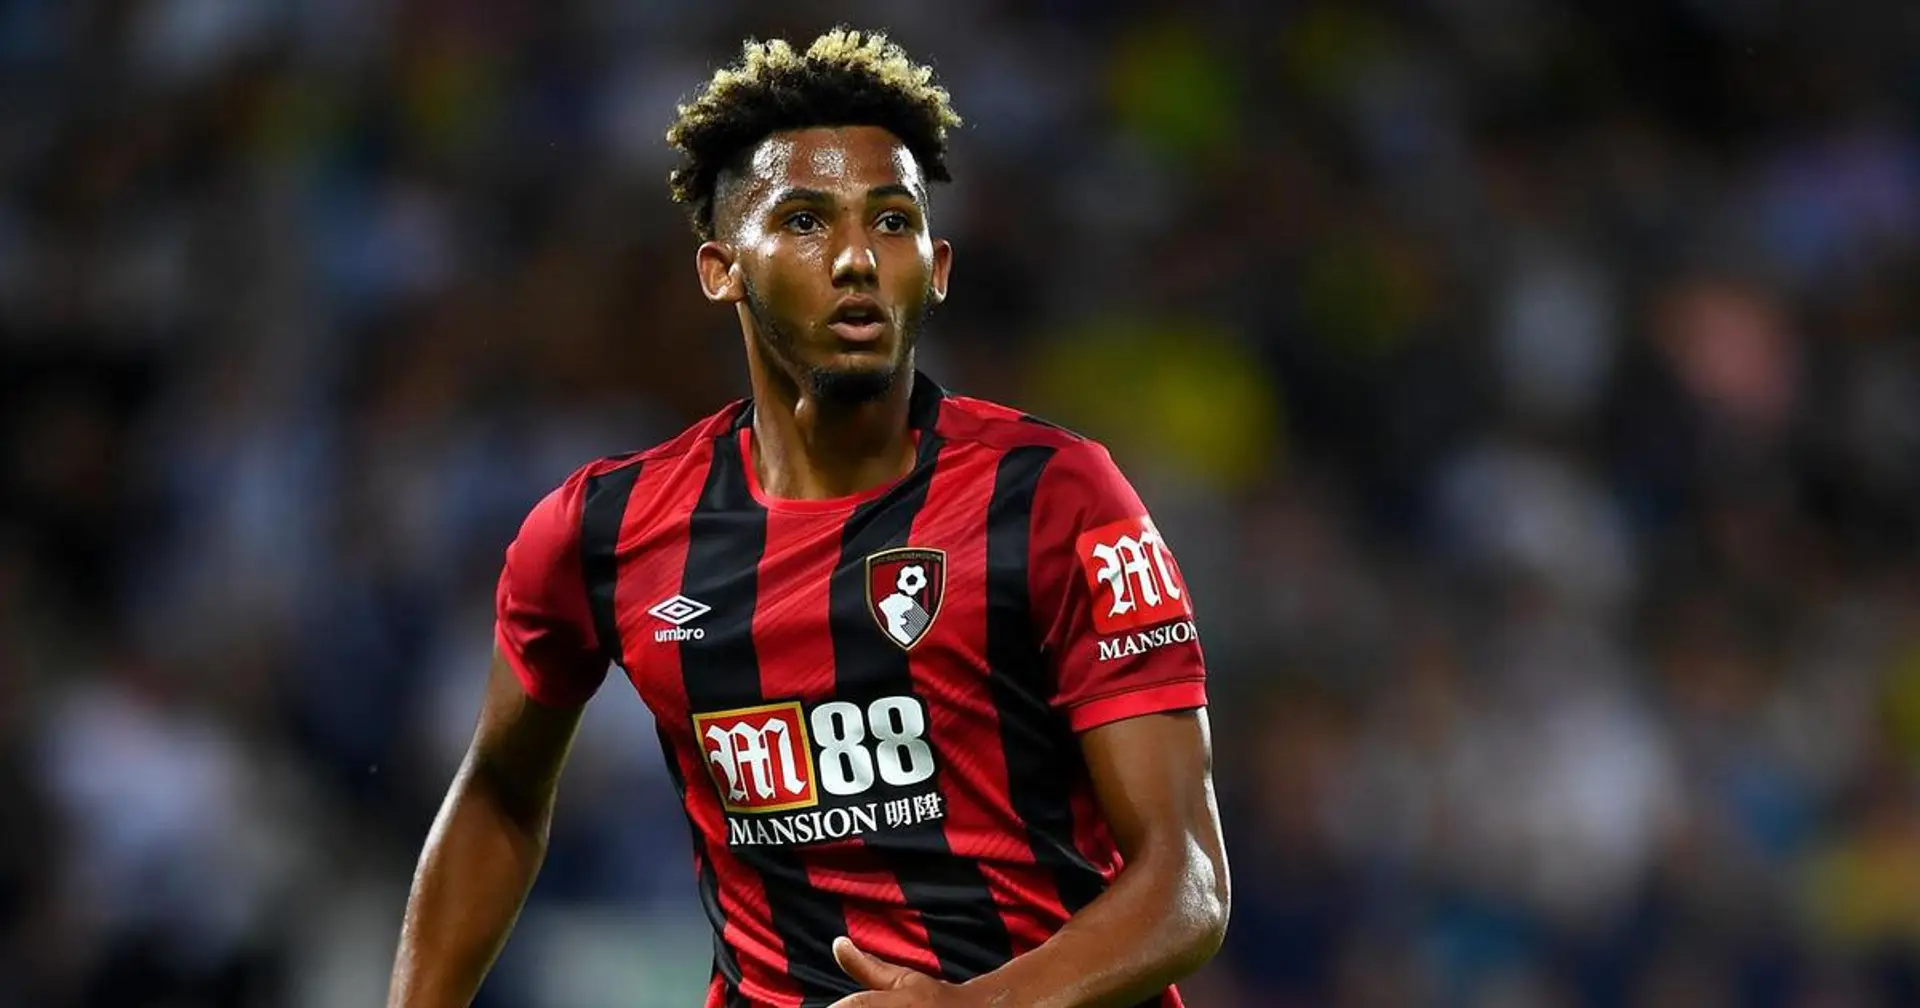 Liverpool 'ready to revive interest' in Bournemouth defender Lloyd Kelly as Klopp eyes defensive reinforcements